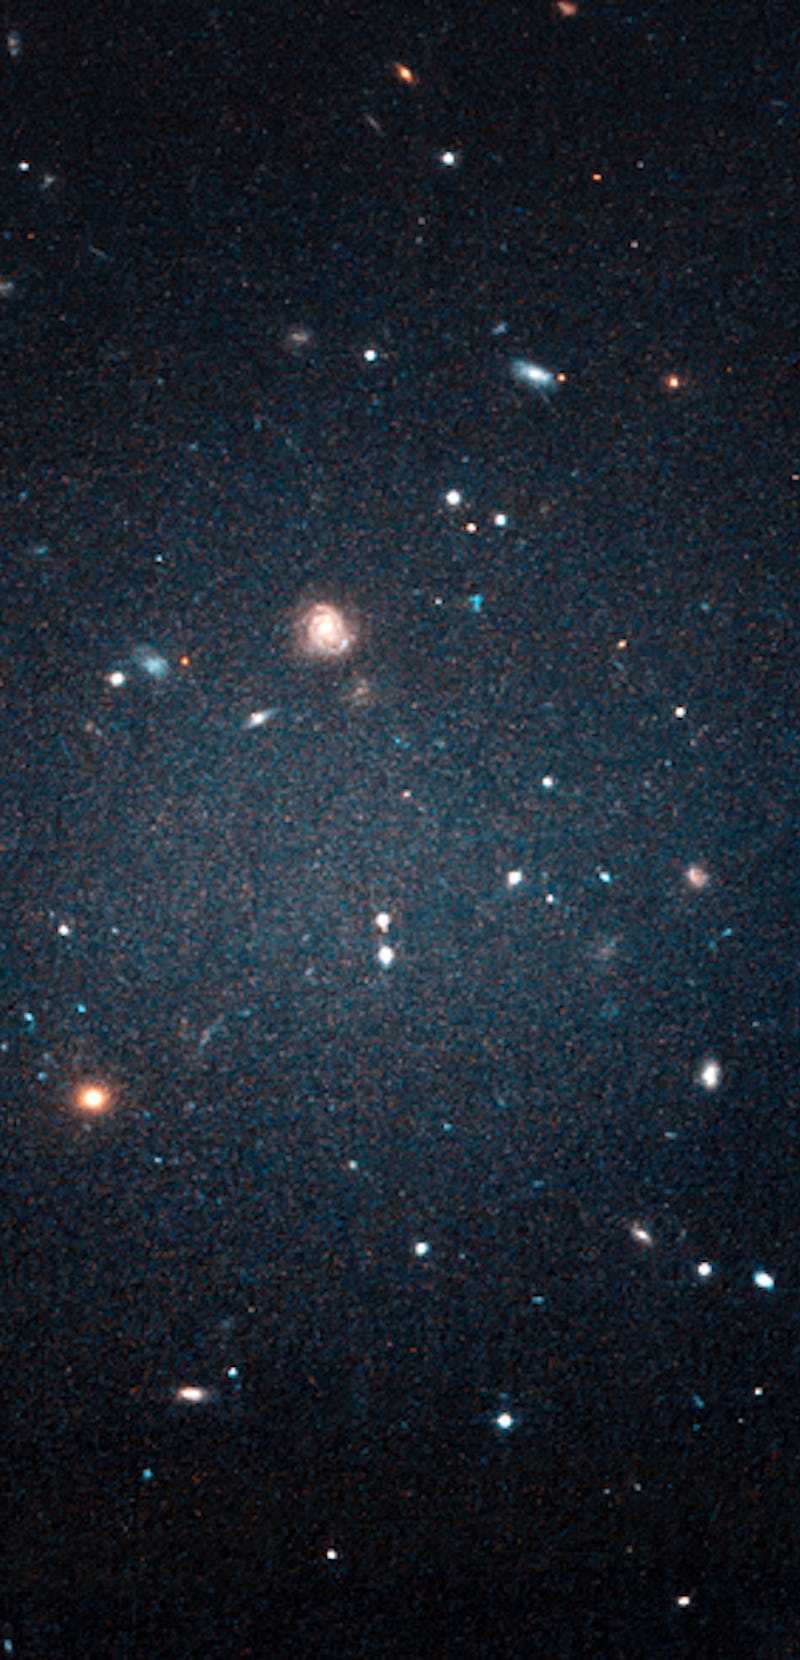 An image of a ghostly ultradiffuse galaxy